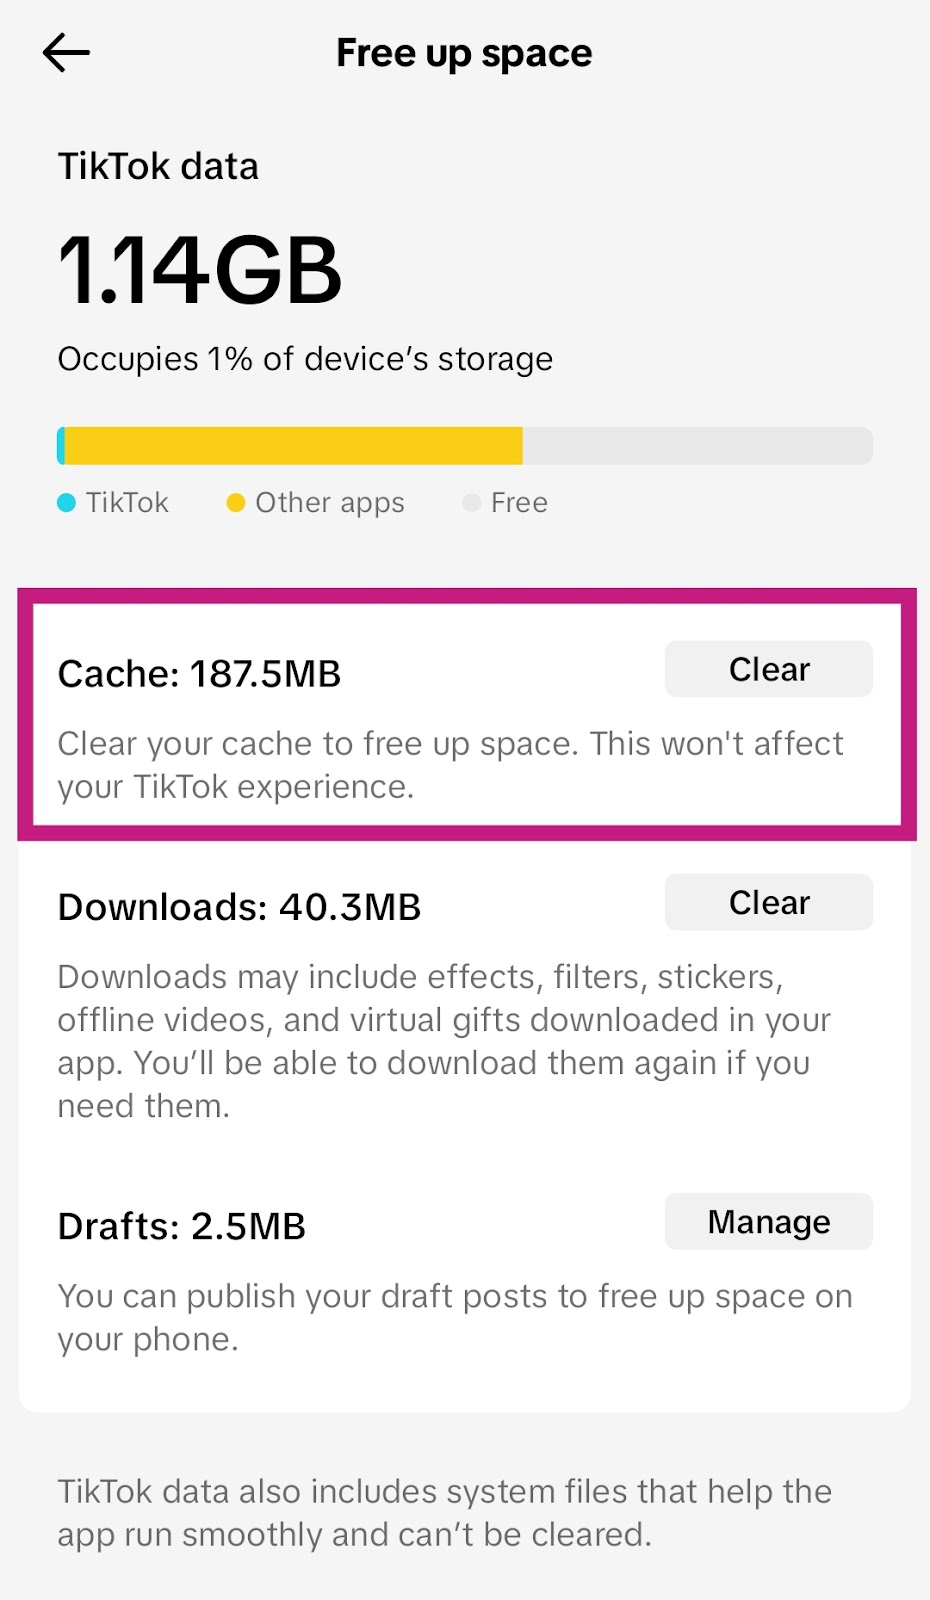 Does Clearing Cache Delete TikTok Drafts?